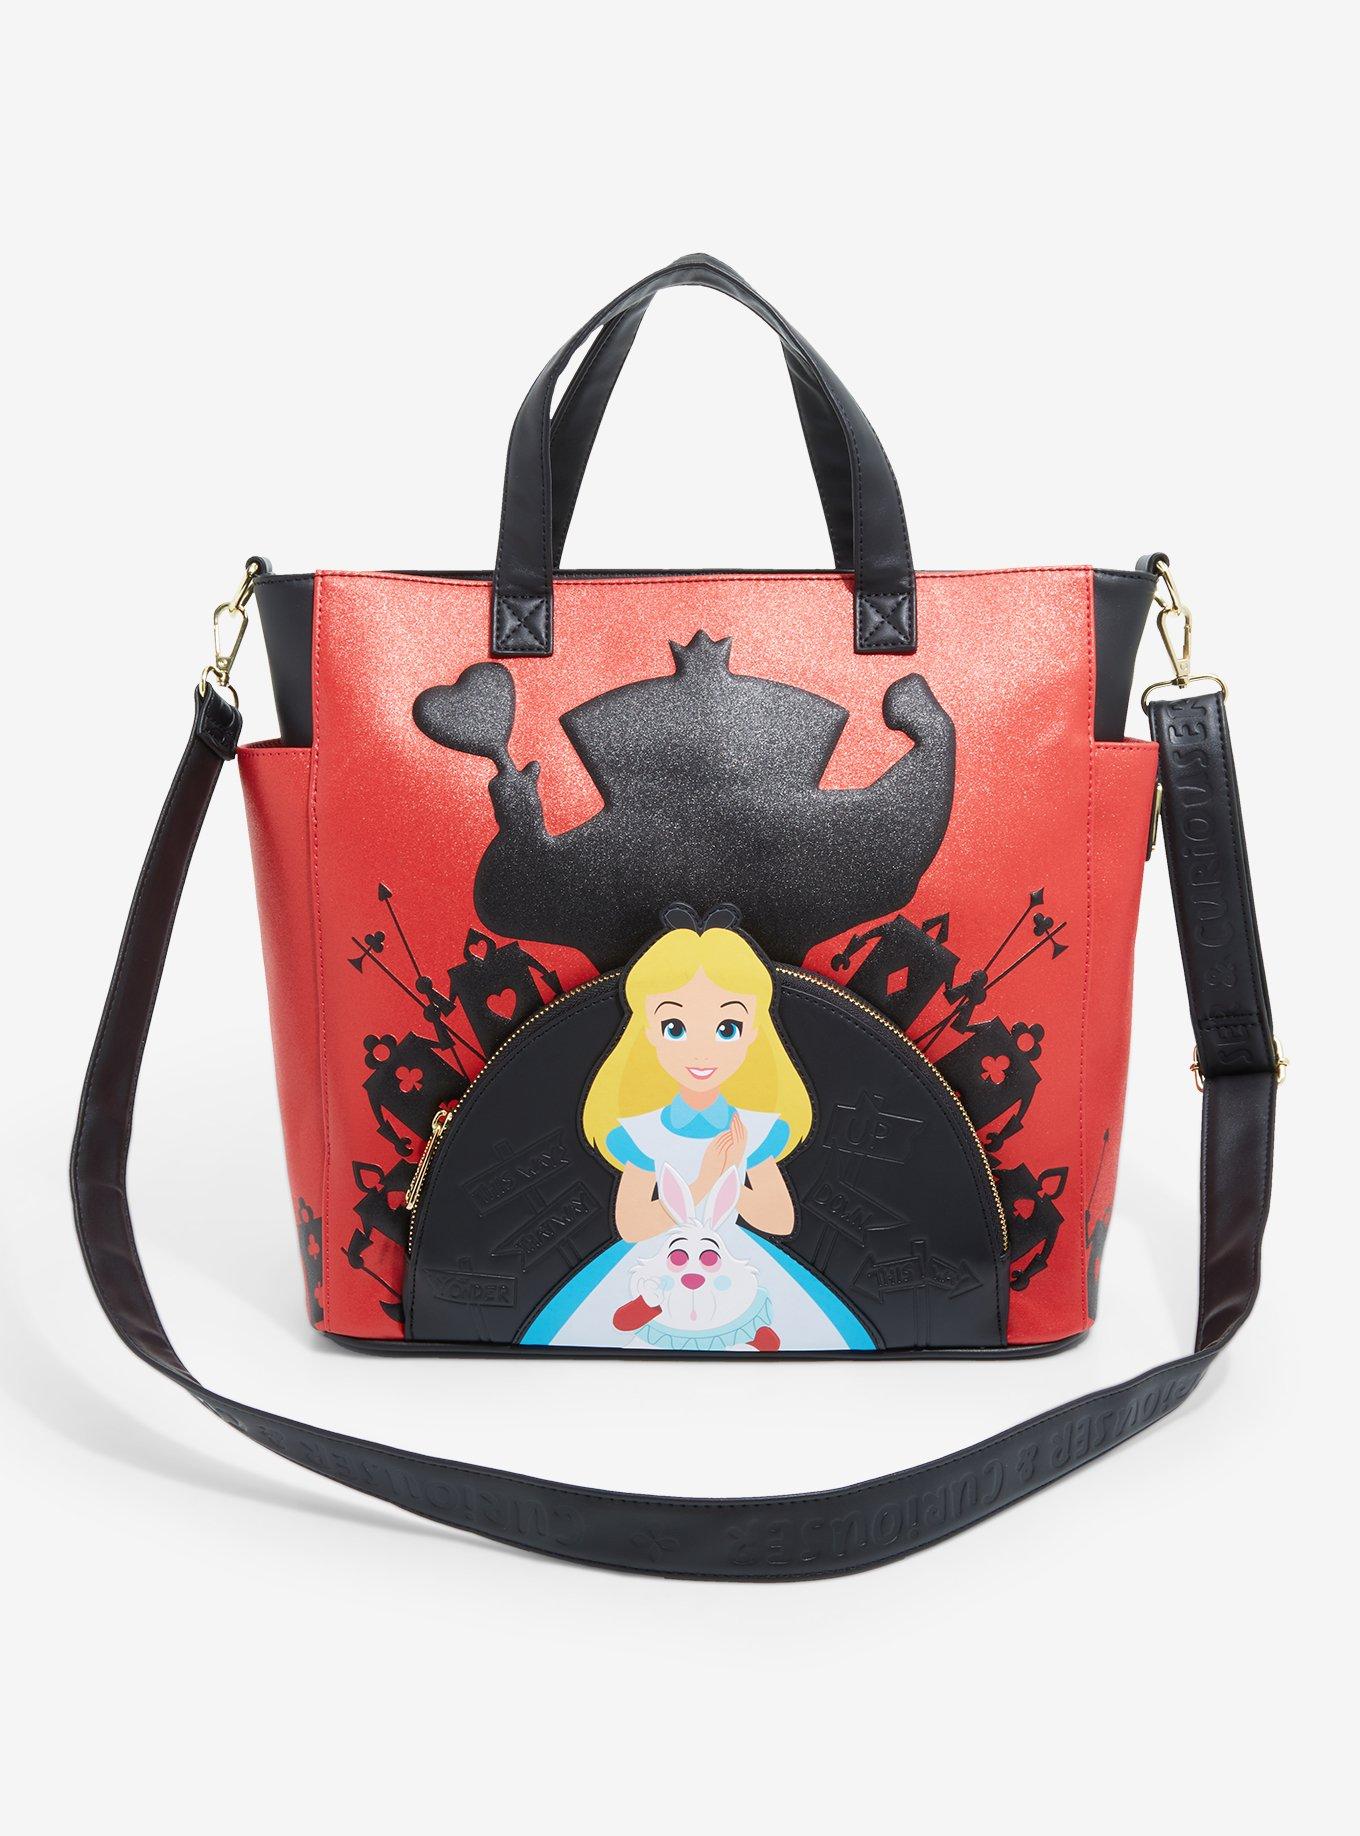 Alice in Wonderland The Queen of Hearts' Eco-Friendly Tote Bag